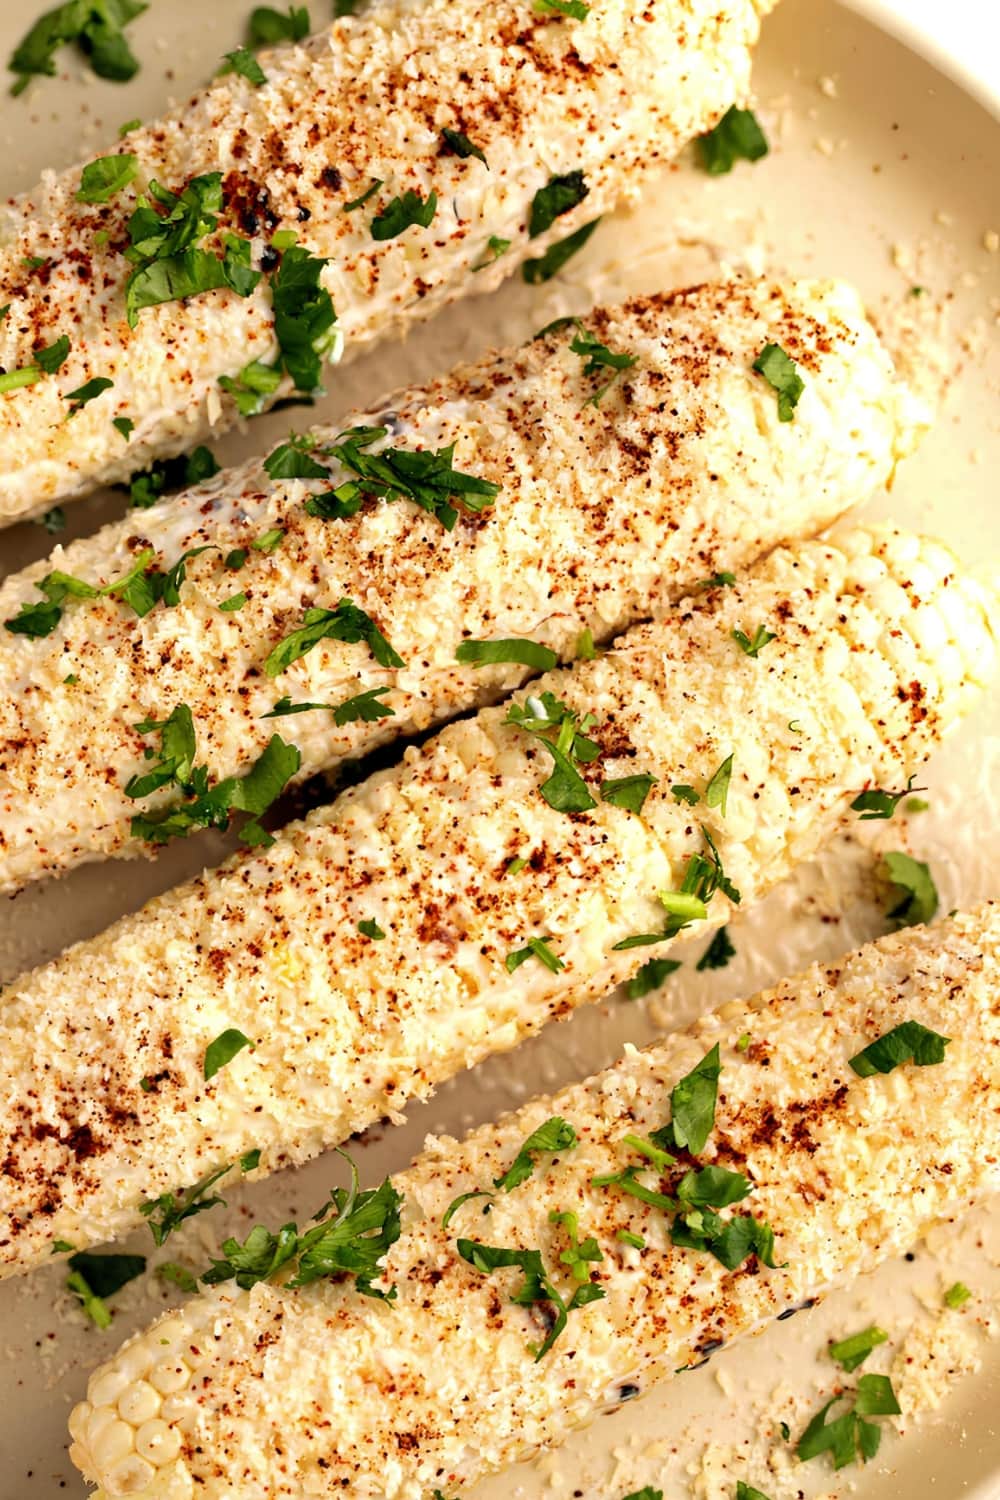 Grilled Mexican Street Corn with Cilantro and Cotija Cheese on Top